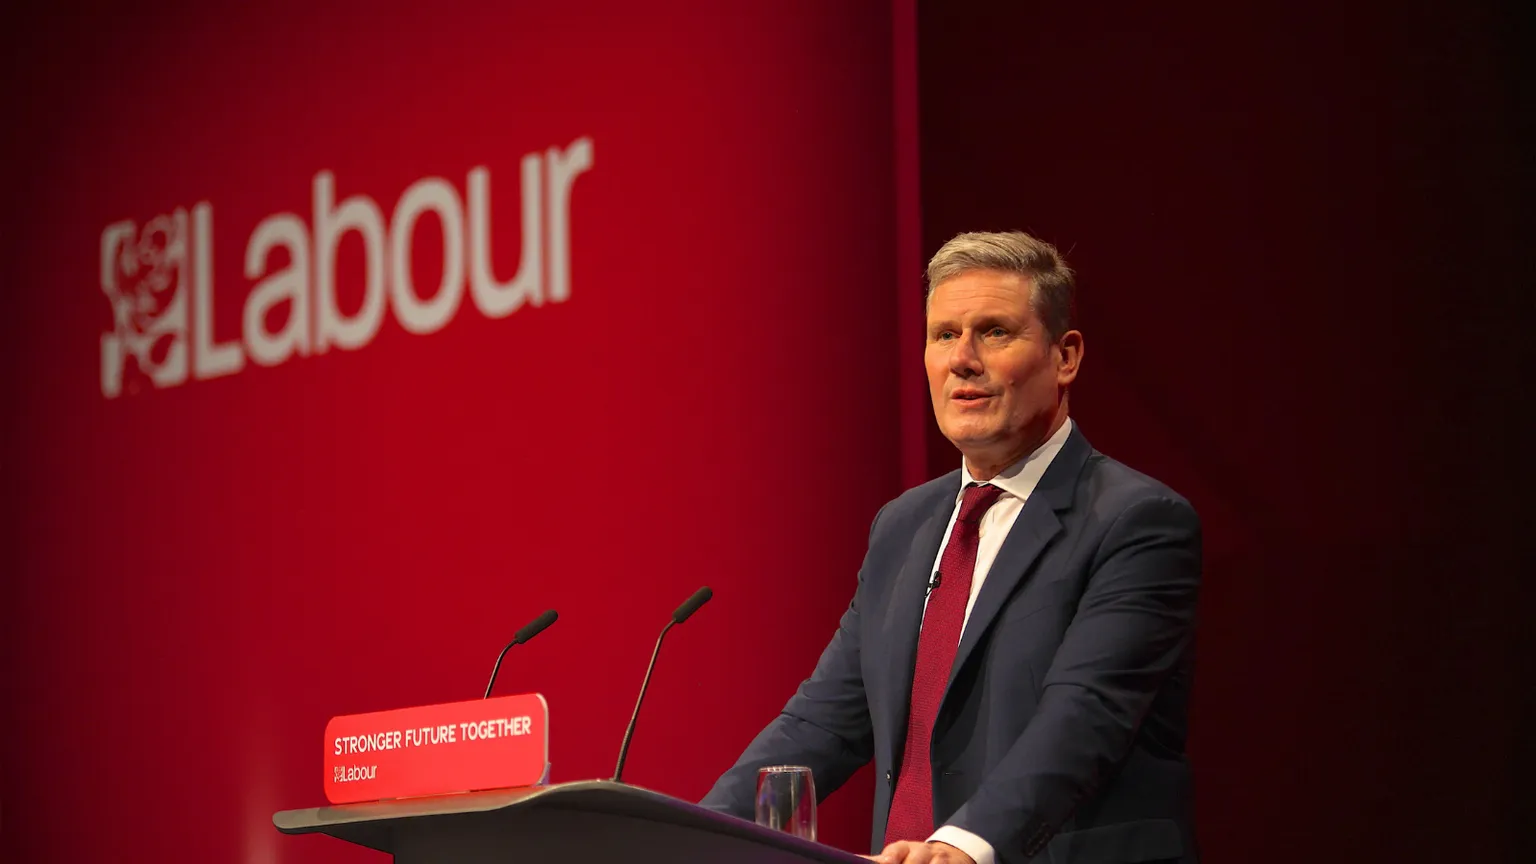 Image: Labour Party Leader Sir Keir Starmer via  Shutterstock